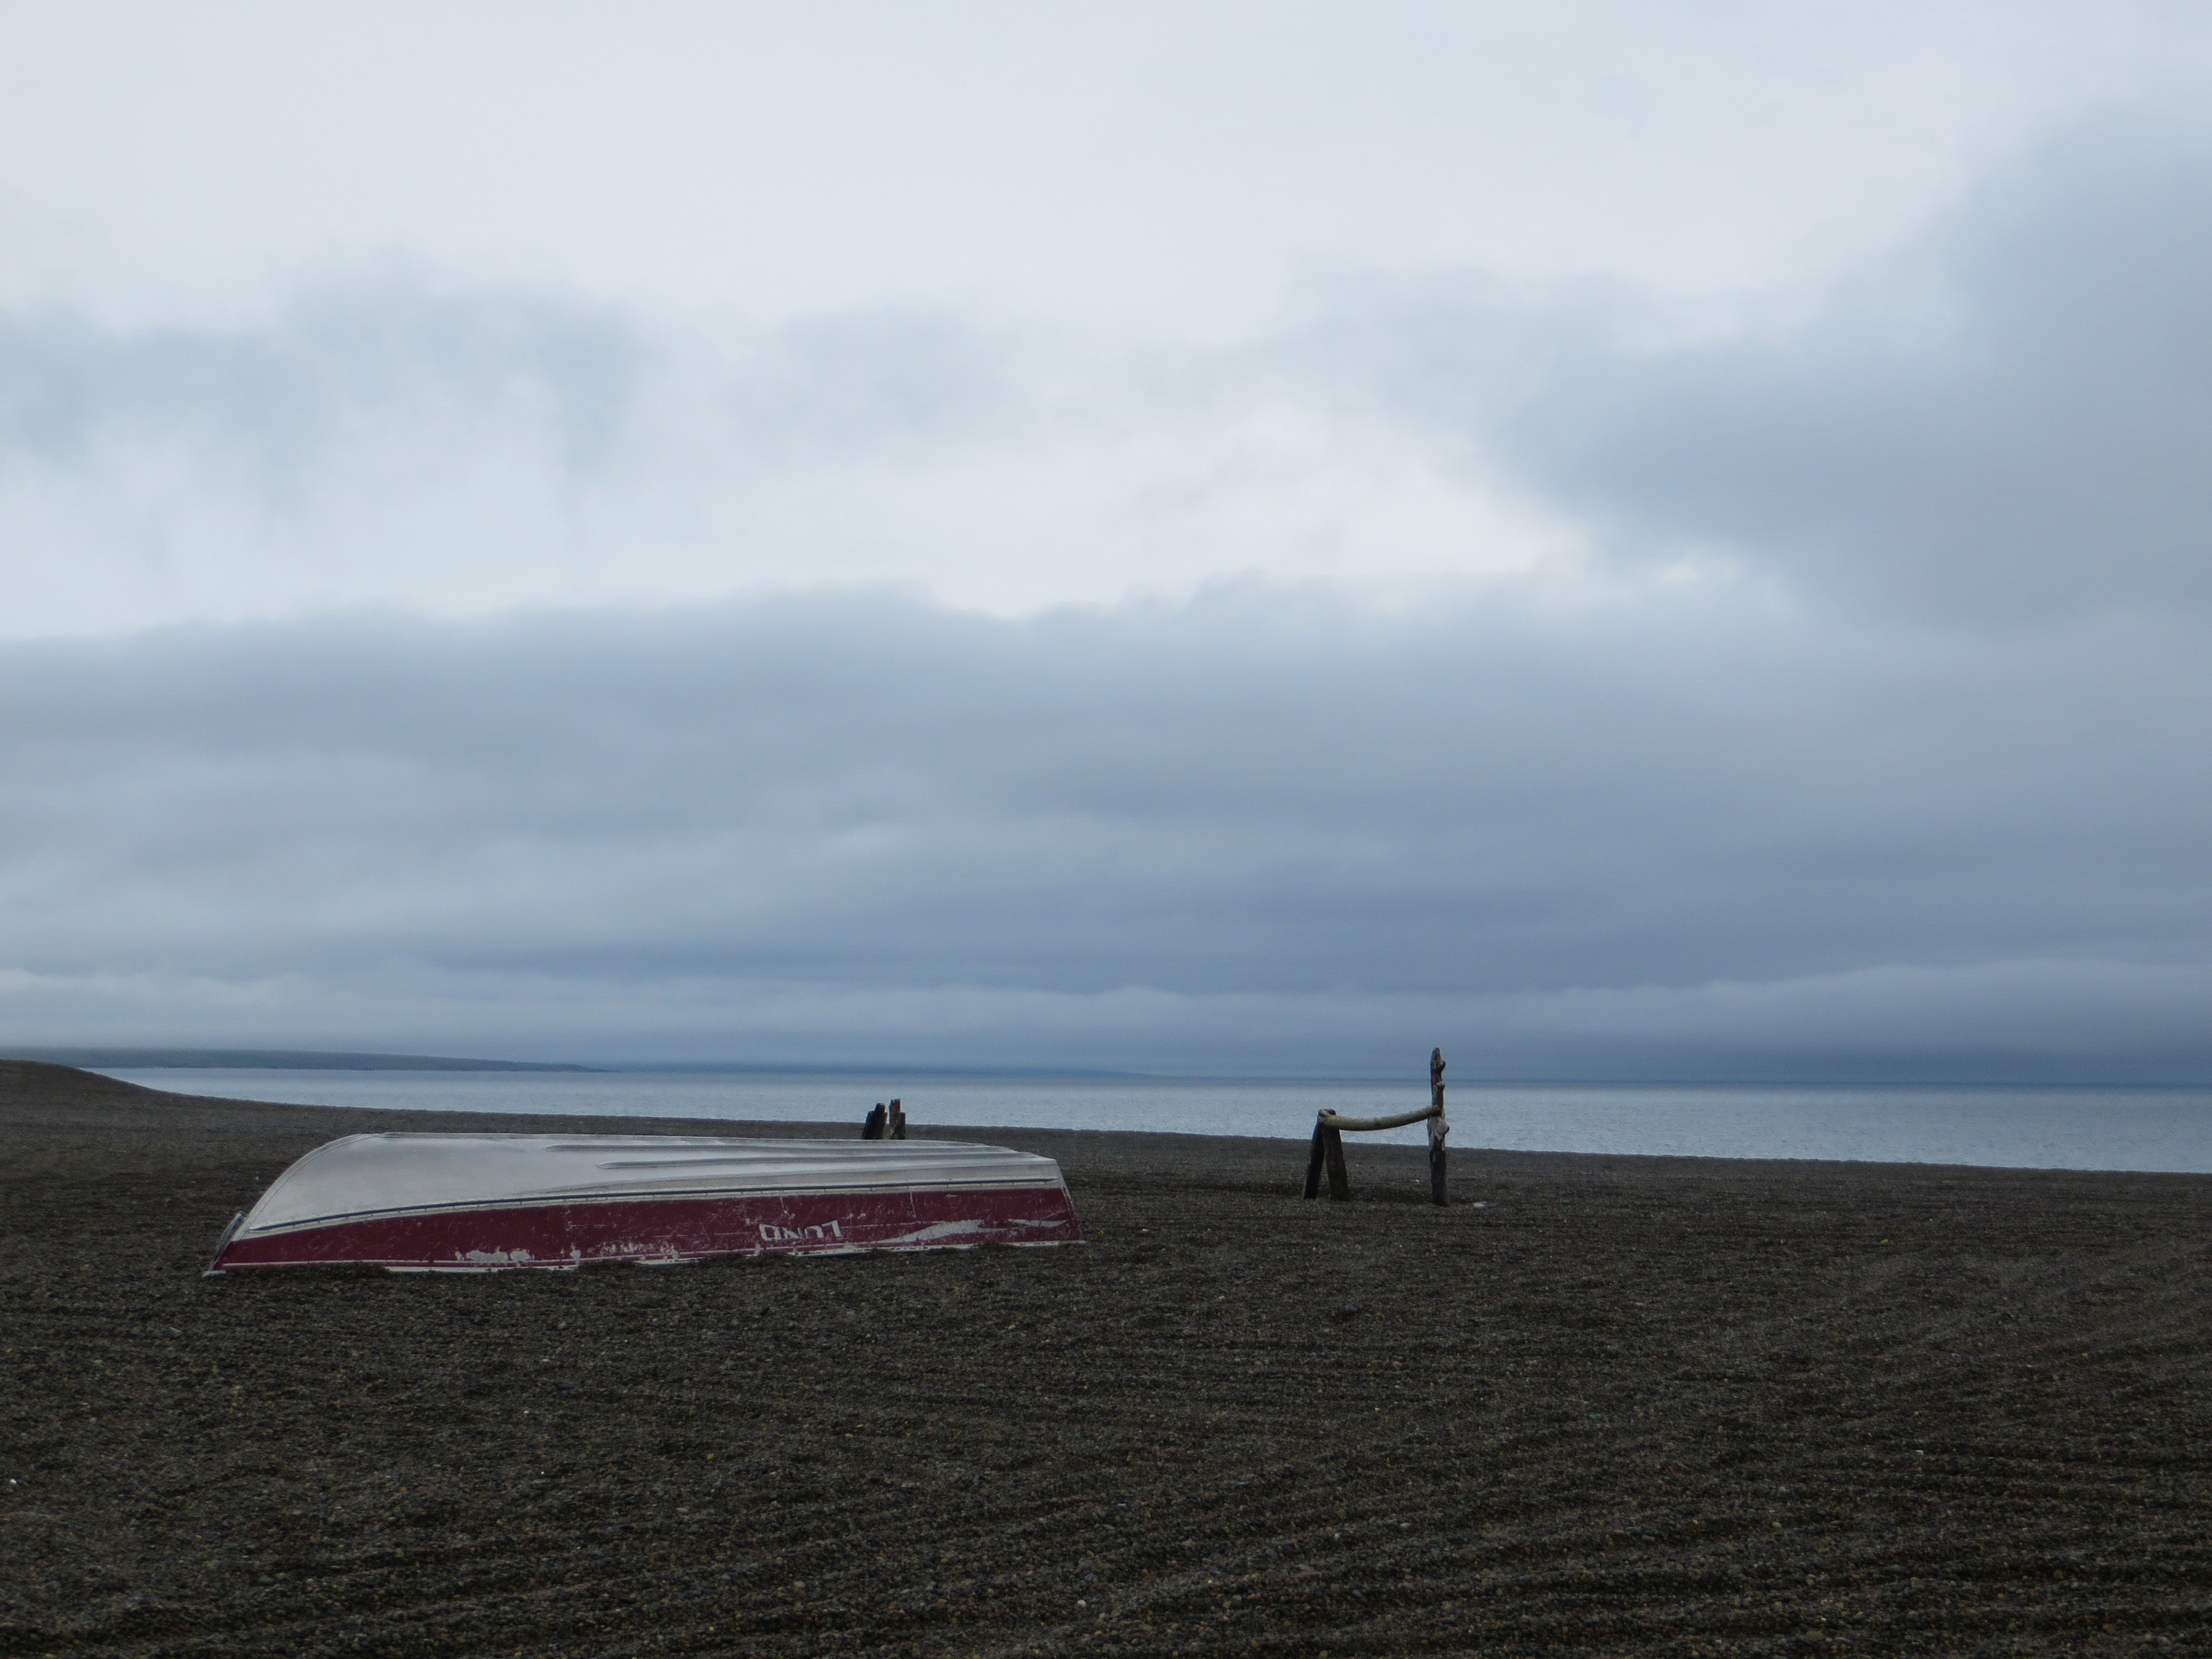 A boat resting on the beach on a cloudy summer day in Gambell, Alaska.